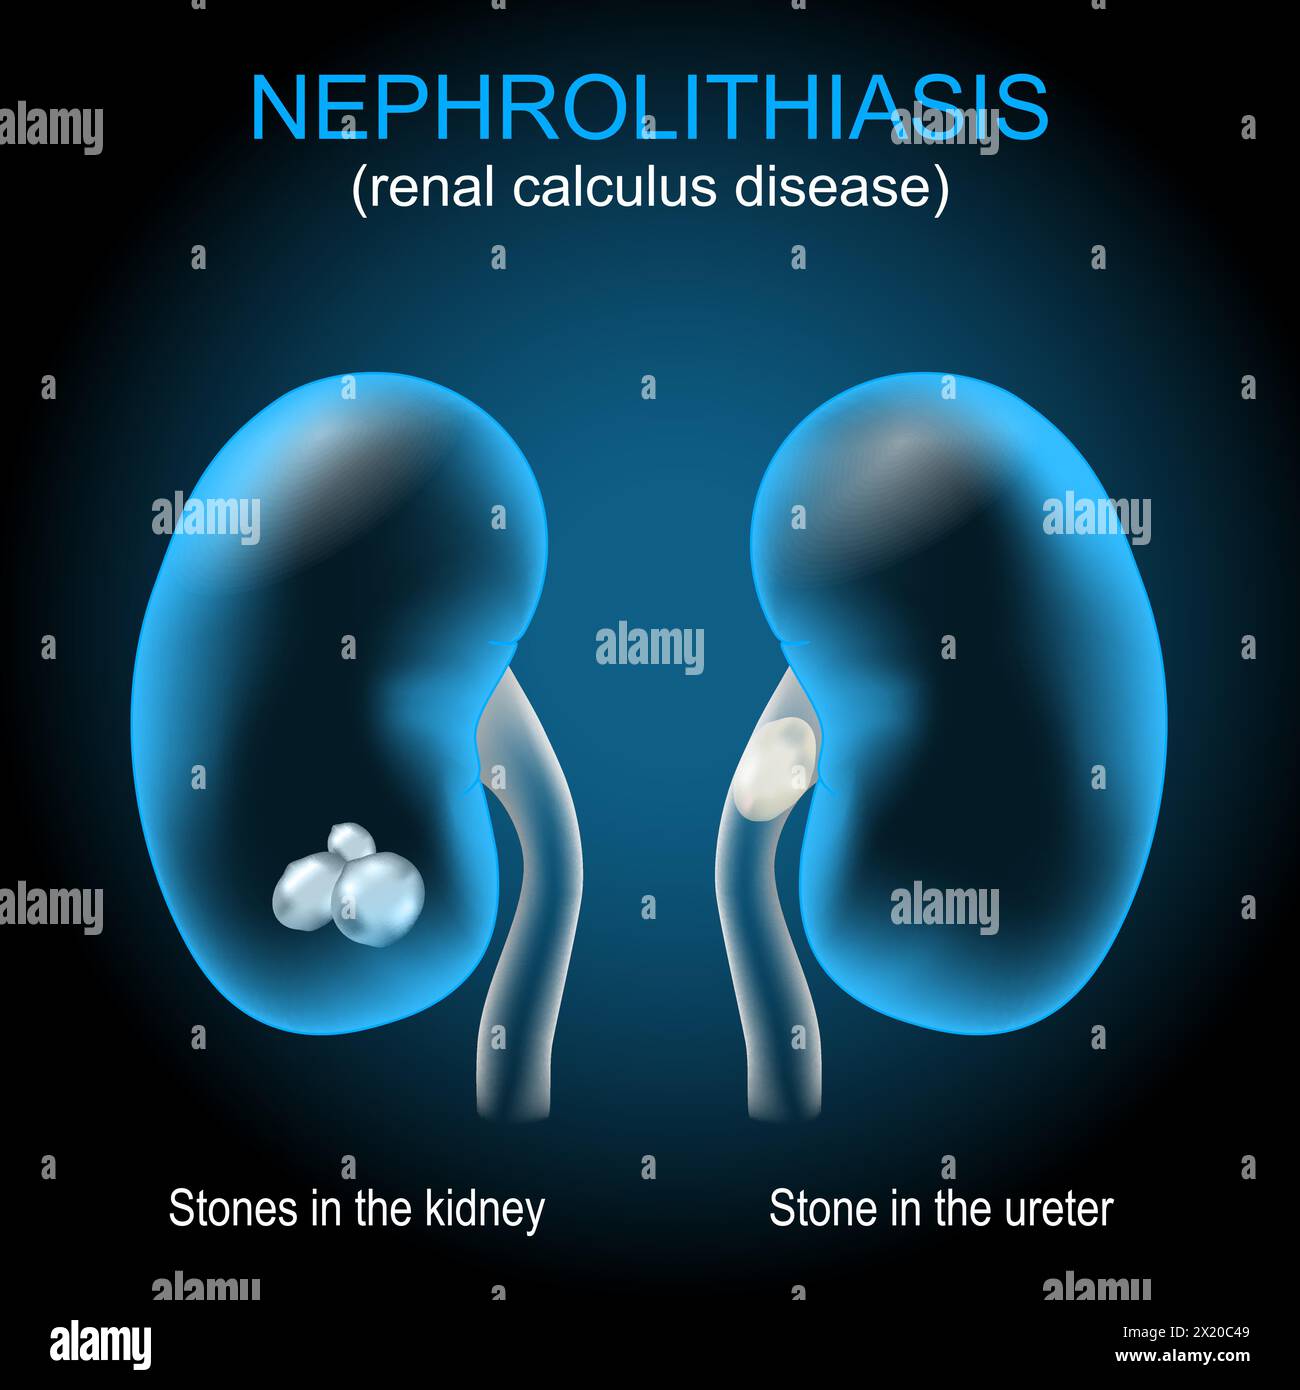 Kidney stone disease. Renal calculus disease. Nephrolithiasis or urolithiasis. Renal calculus that develops in the urinary tract. Vector illustration Stock Vector